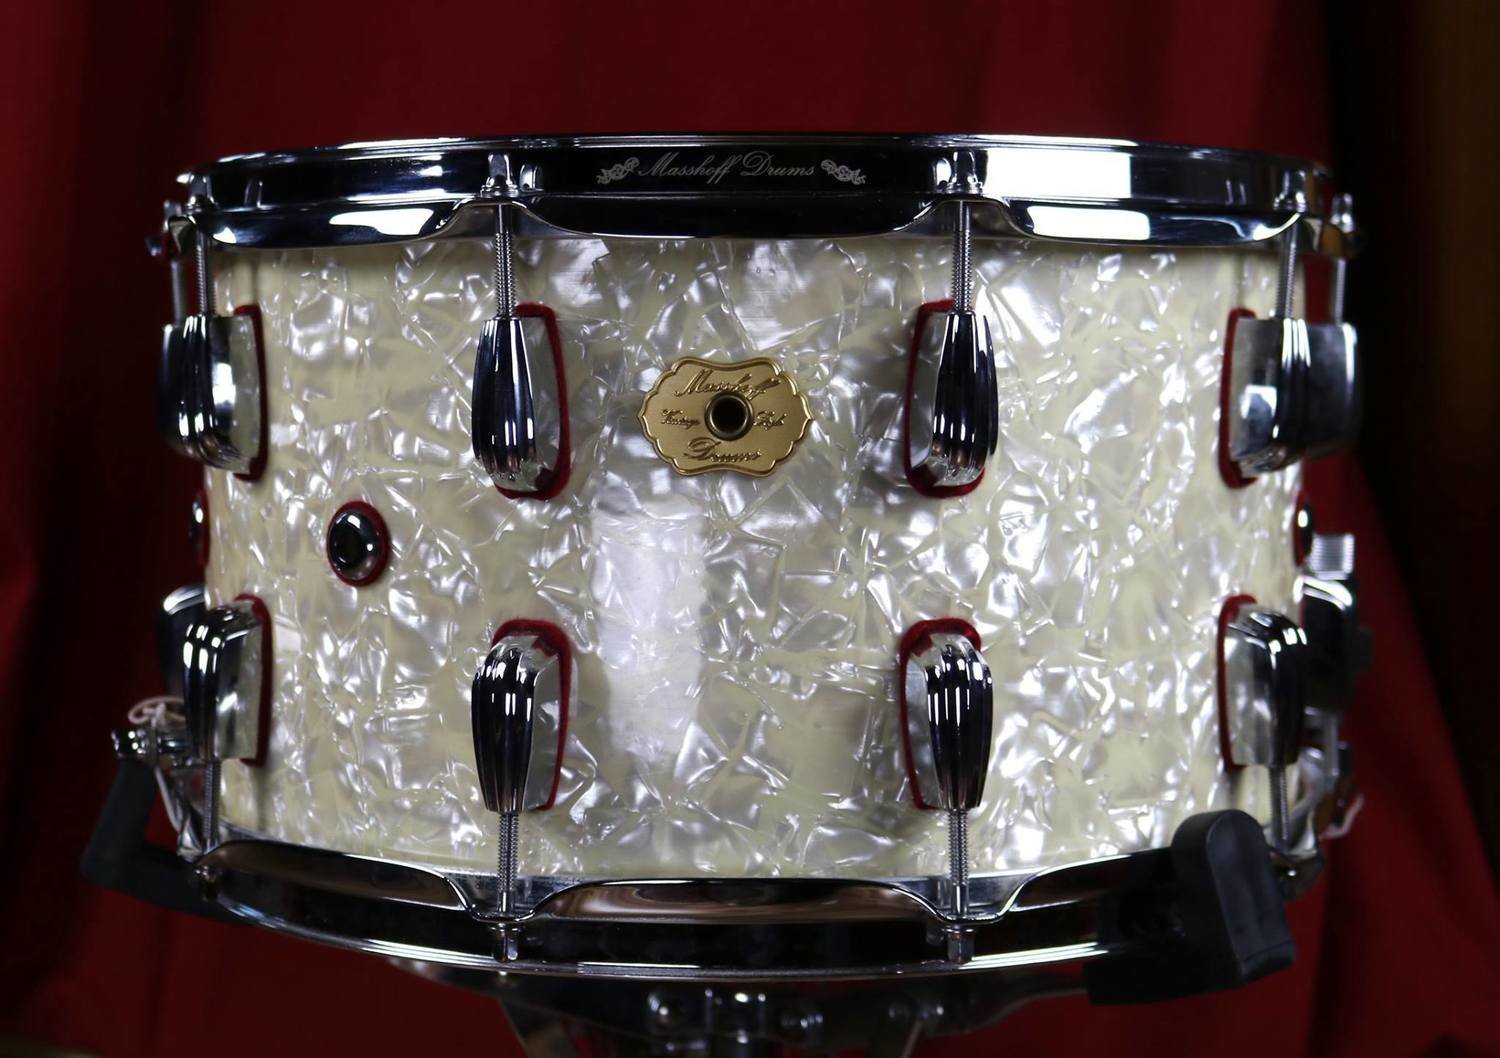 Z___Masshoff Drums with Diamonds,Oysters & Pearls [configurator]